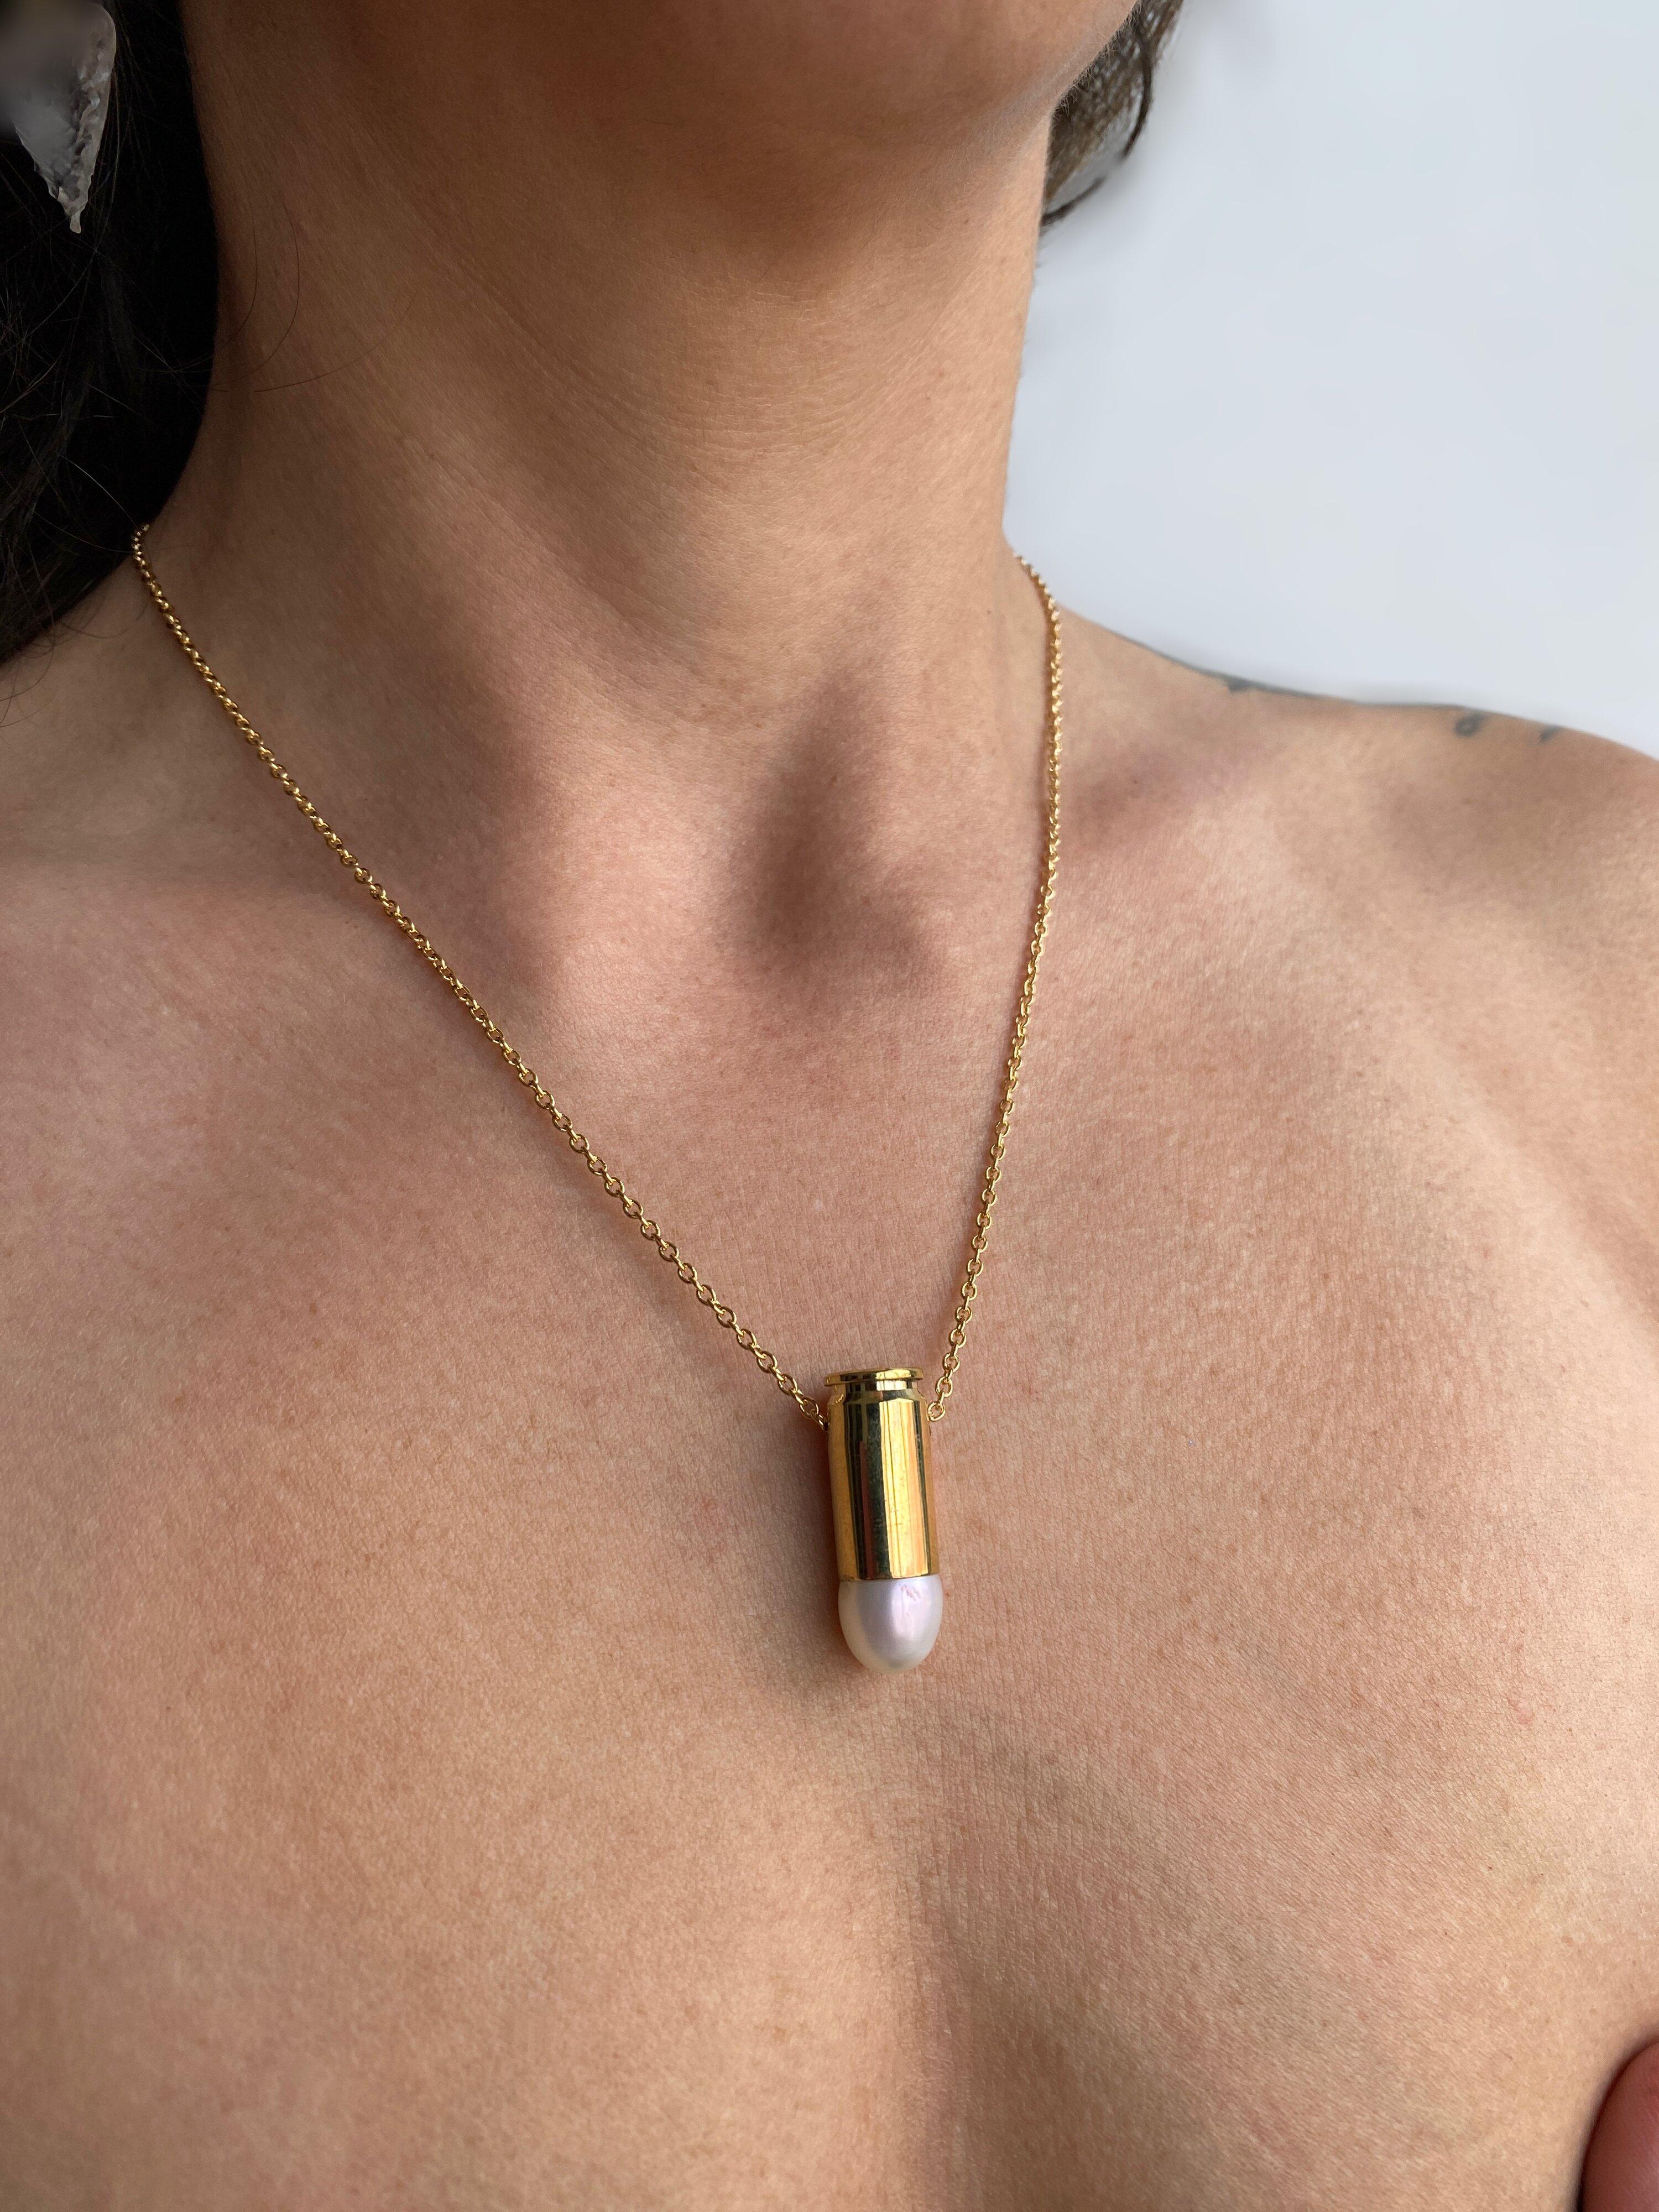 This captivating necklace features a 9mm gold filled bullet casket set with freshwater pearl. This piece is from the “Peace” collection by Sebastian Jaramillo, commemorating the signing of peace between the Colombian guerrillas and the state,